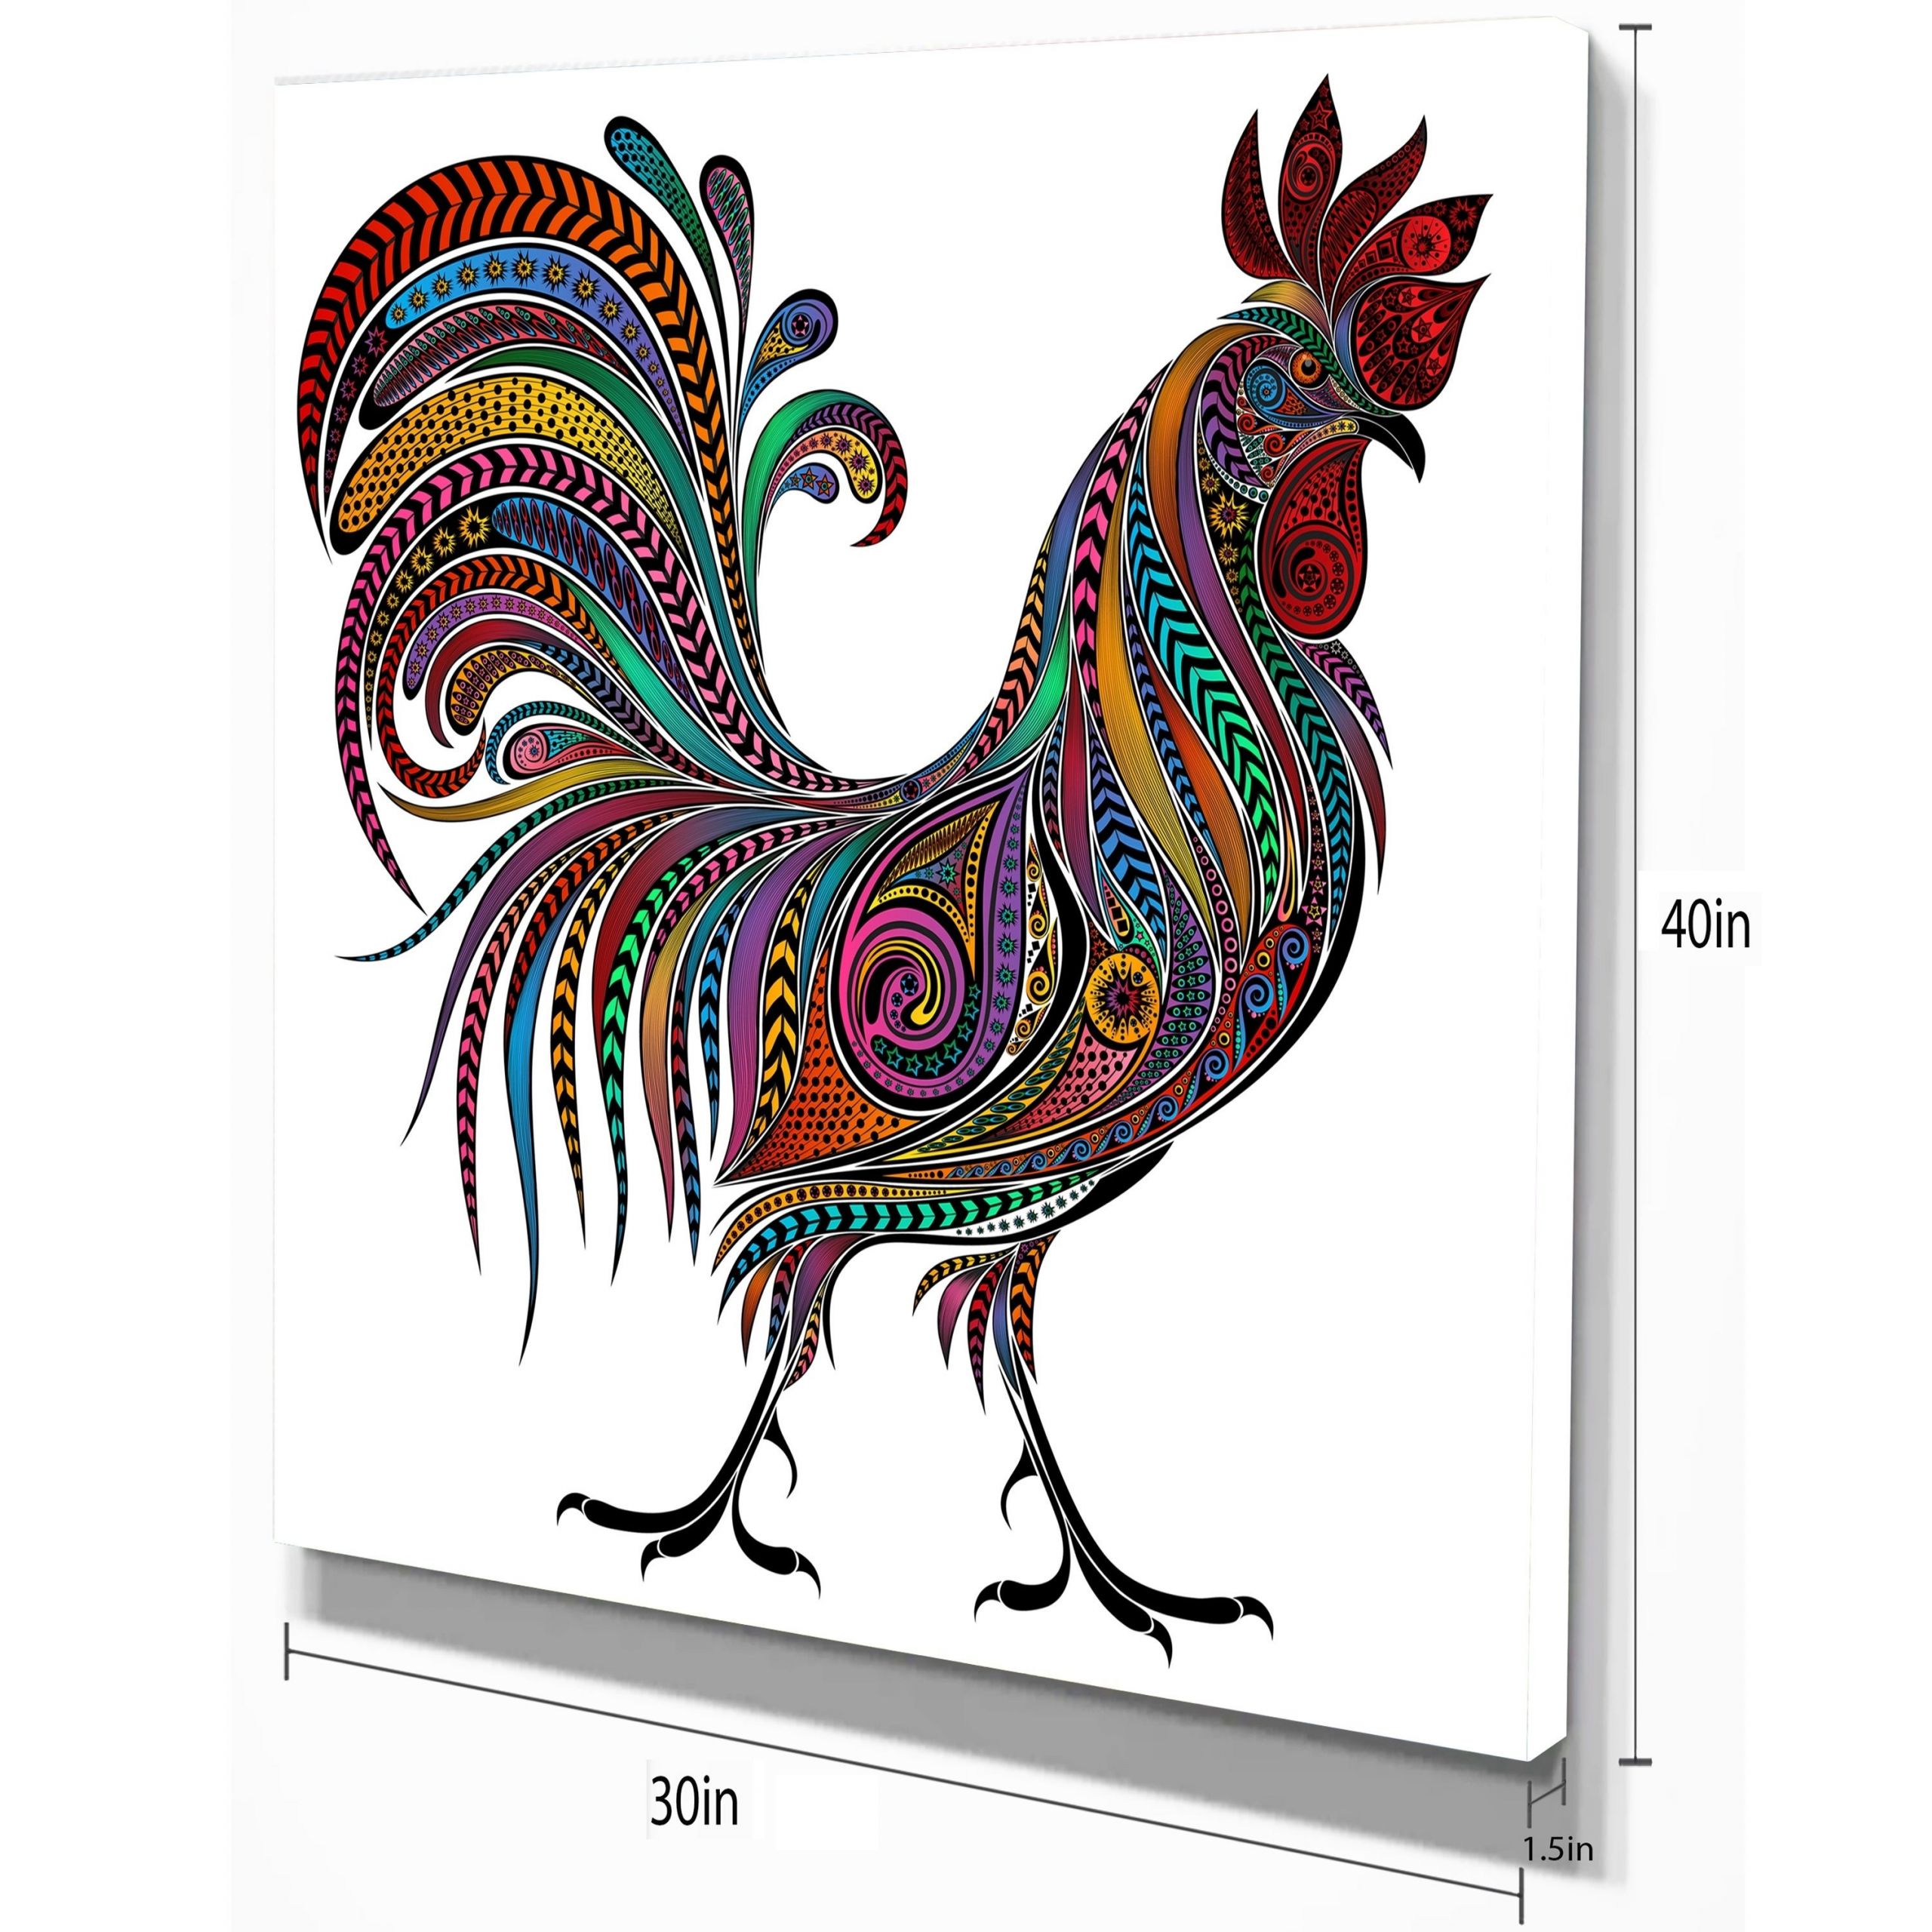 Designart 2017 Colored Patterns Rooster Farmhouse Animal Painting Print on Wrapped Canvas ae5e9061 d212 4ed7 8467 b74ca3eea60b